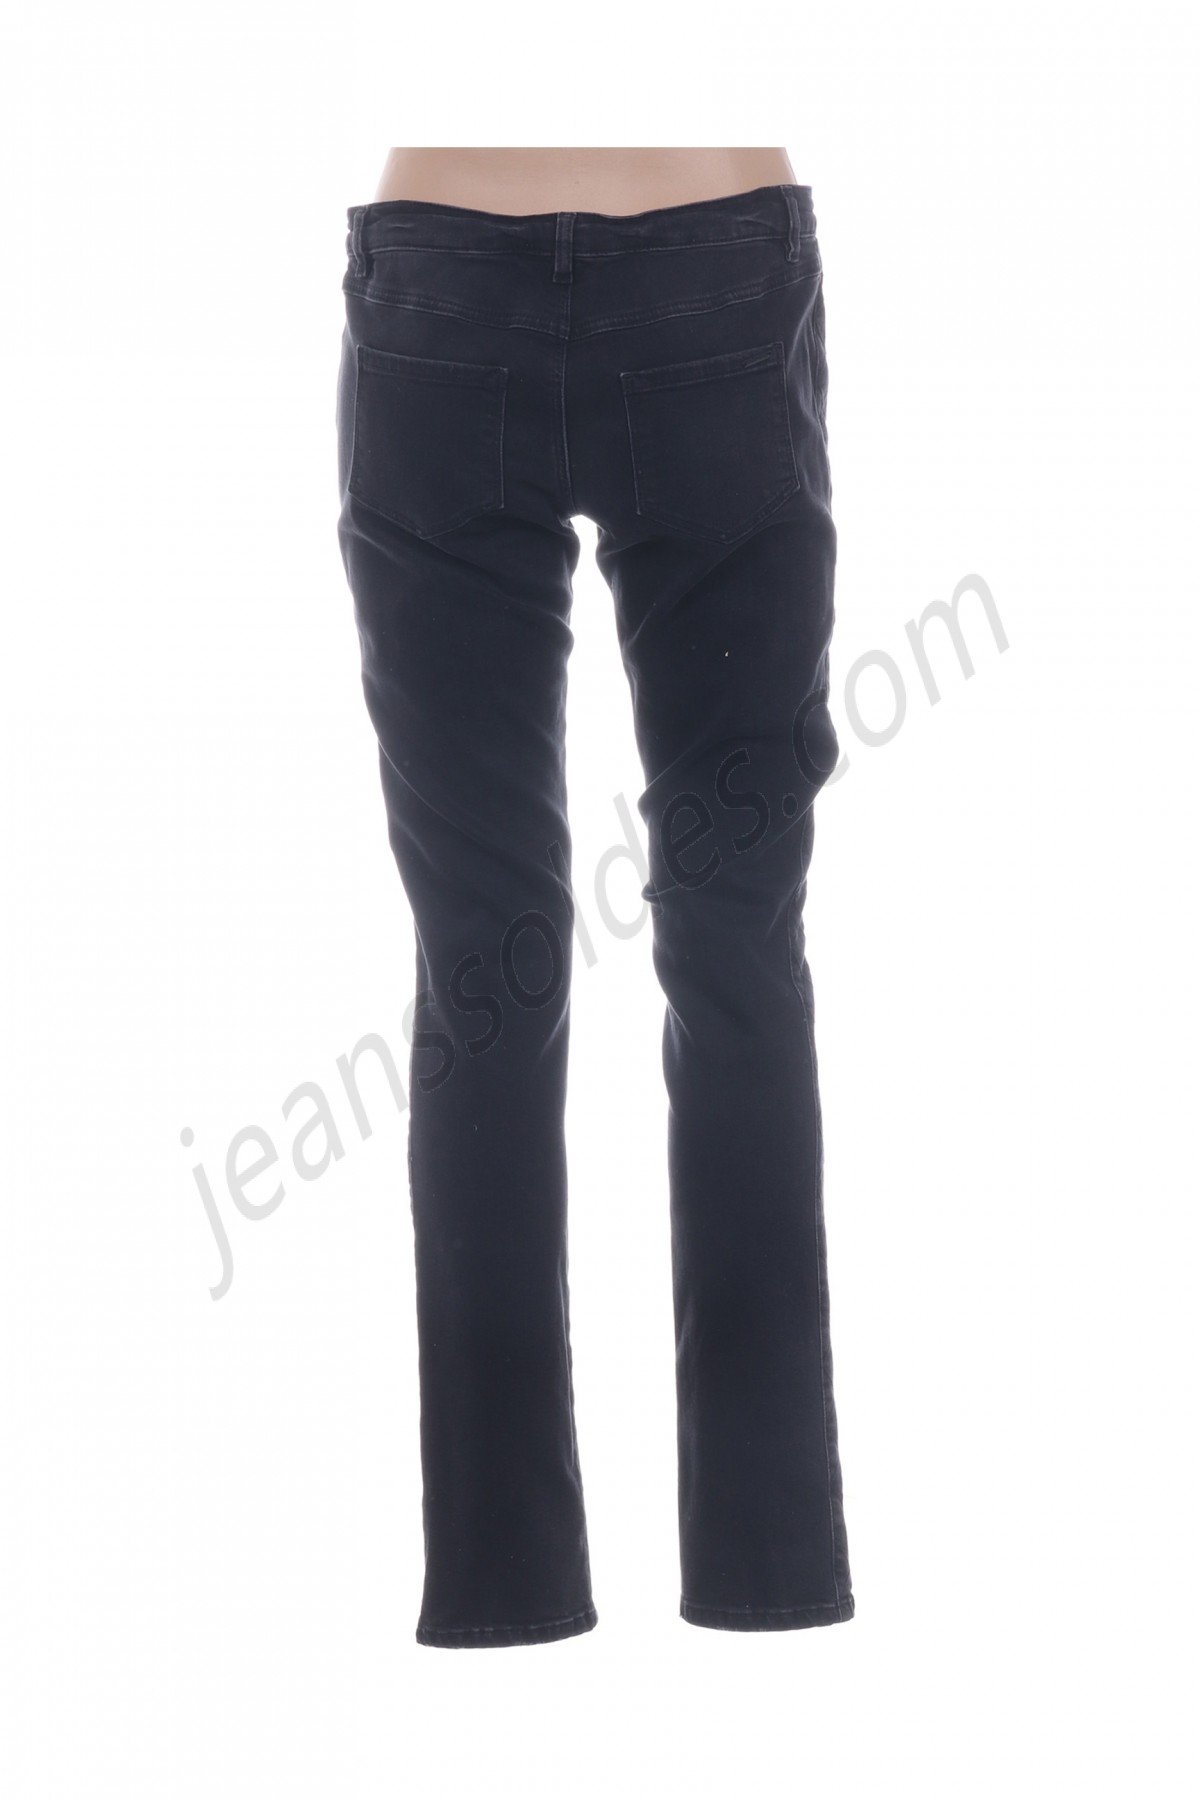 one step-Jeans coupe slim prix d’amis - -1